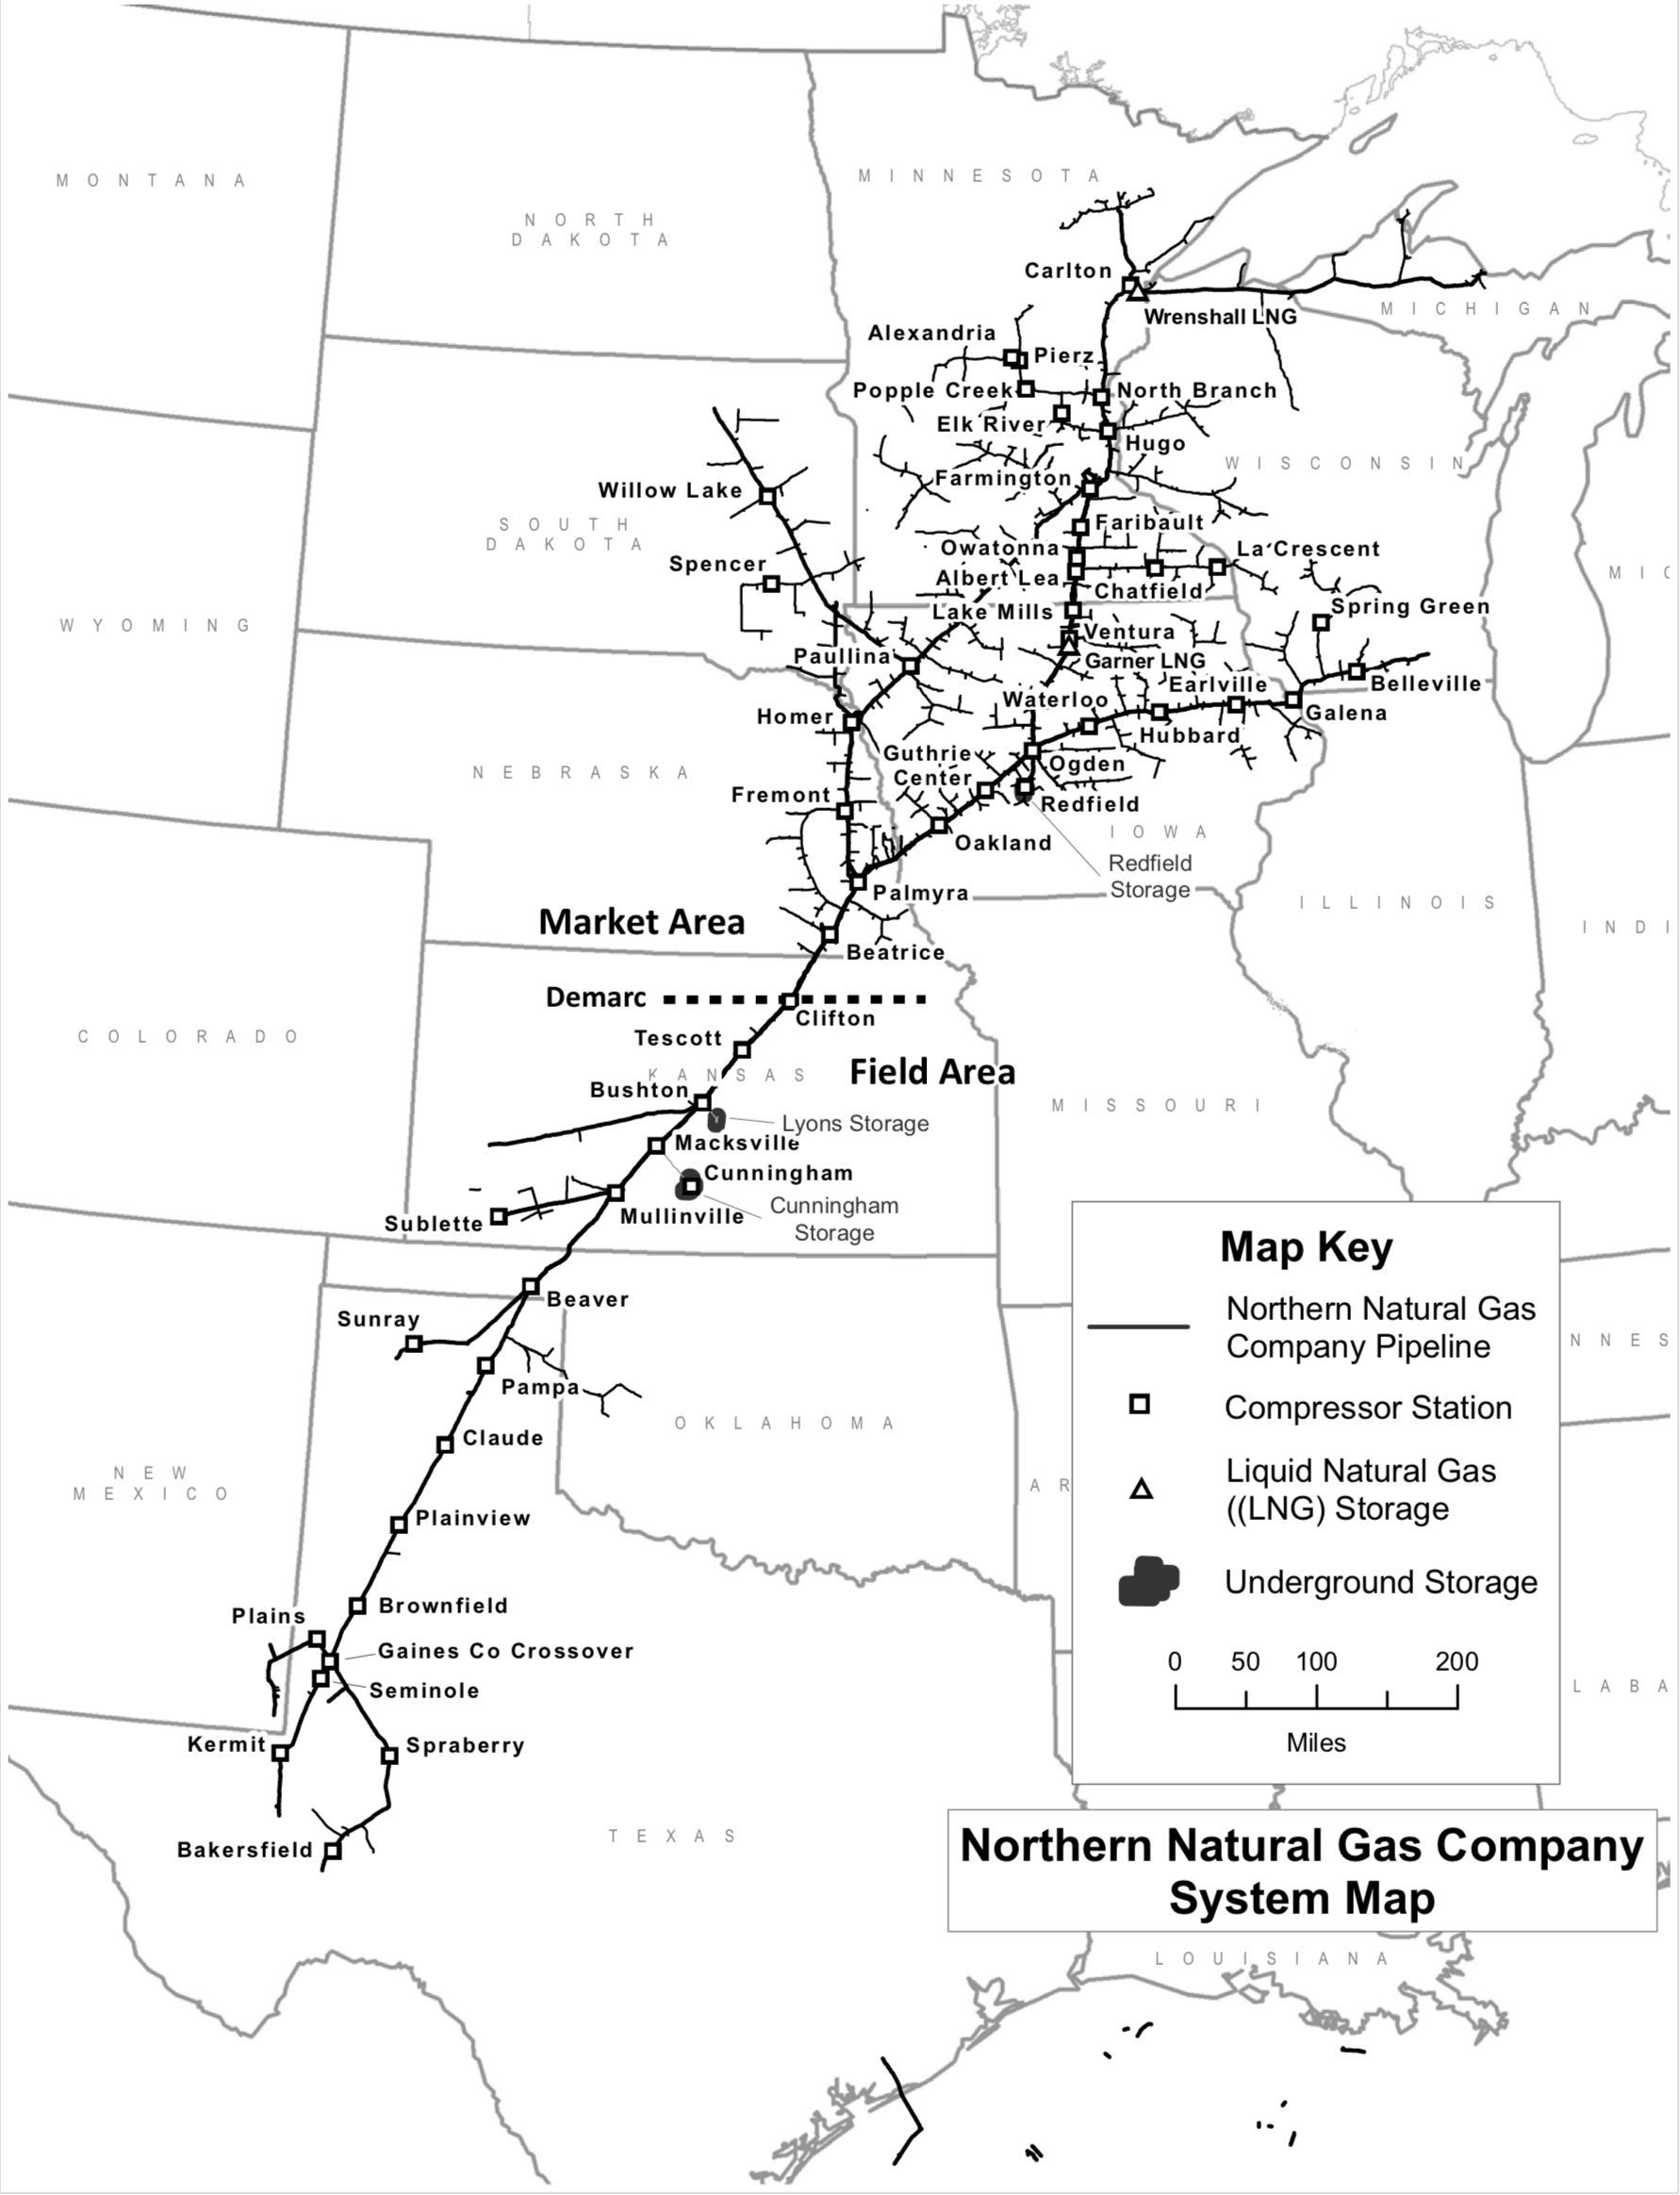 Pipeline Database The Coalition For Renewable Natural Gas